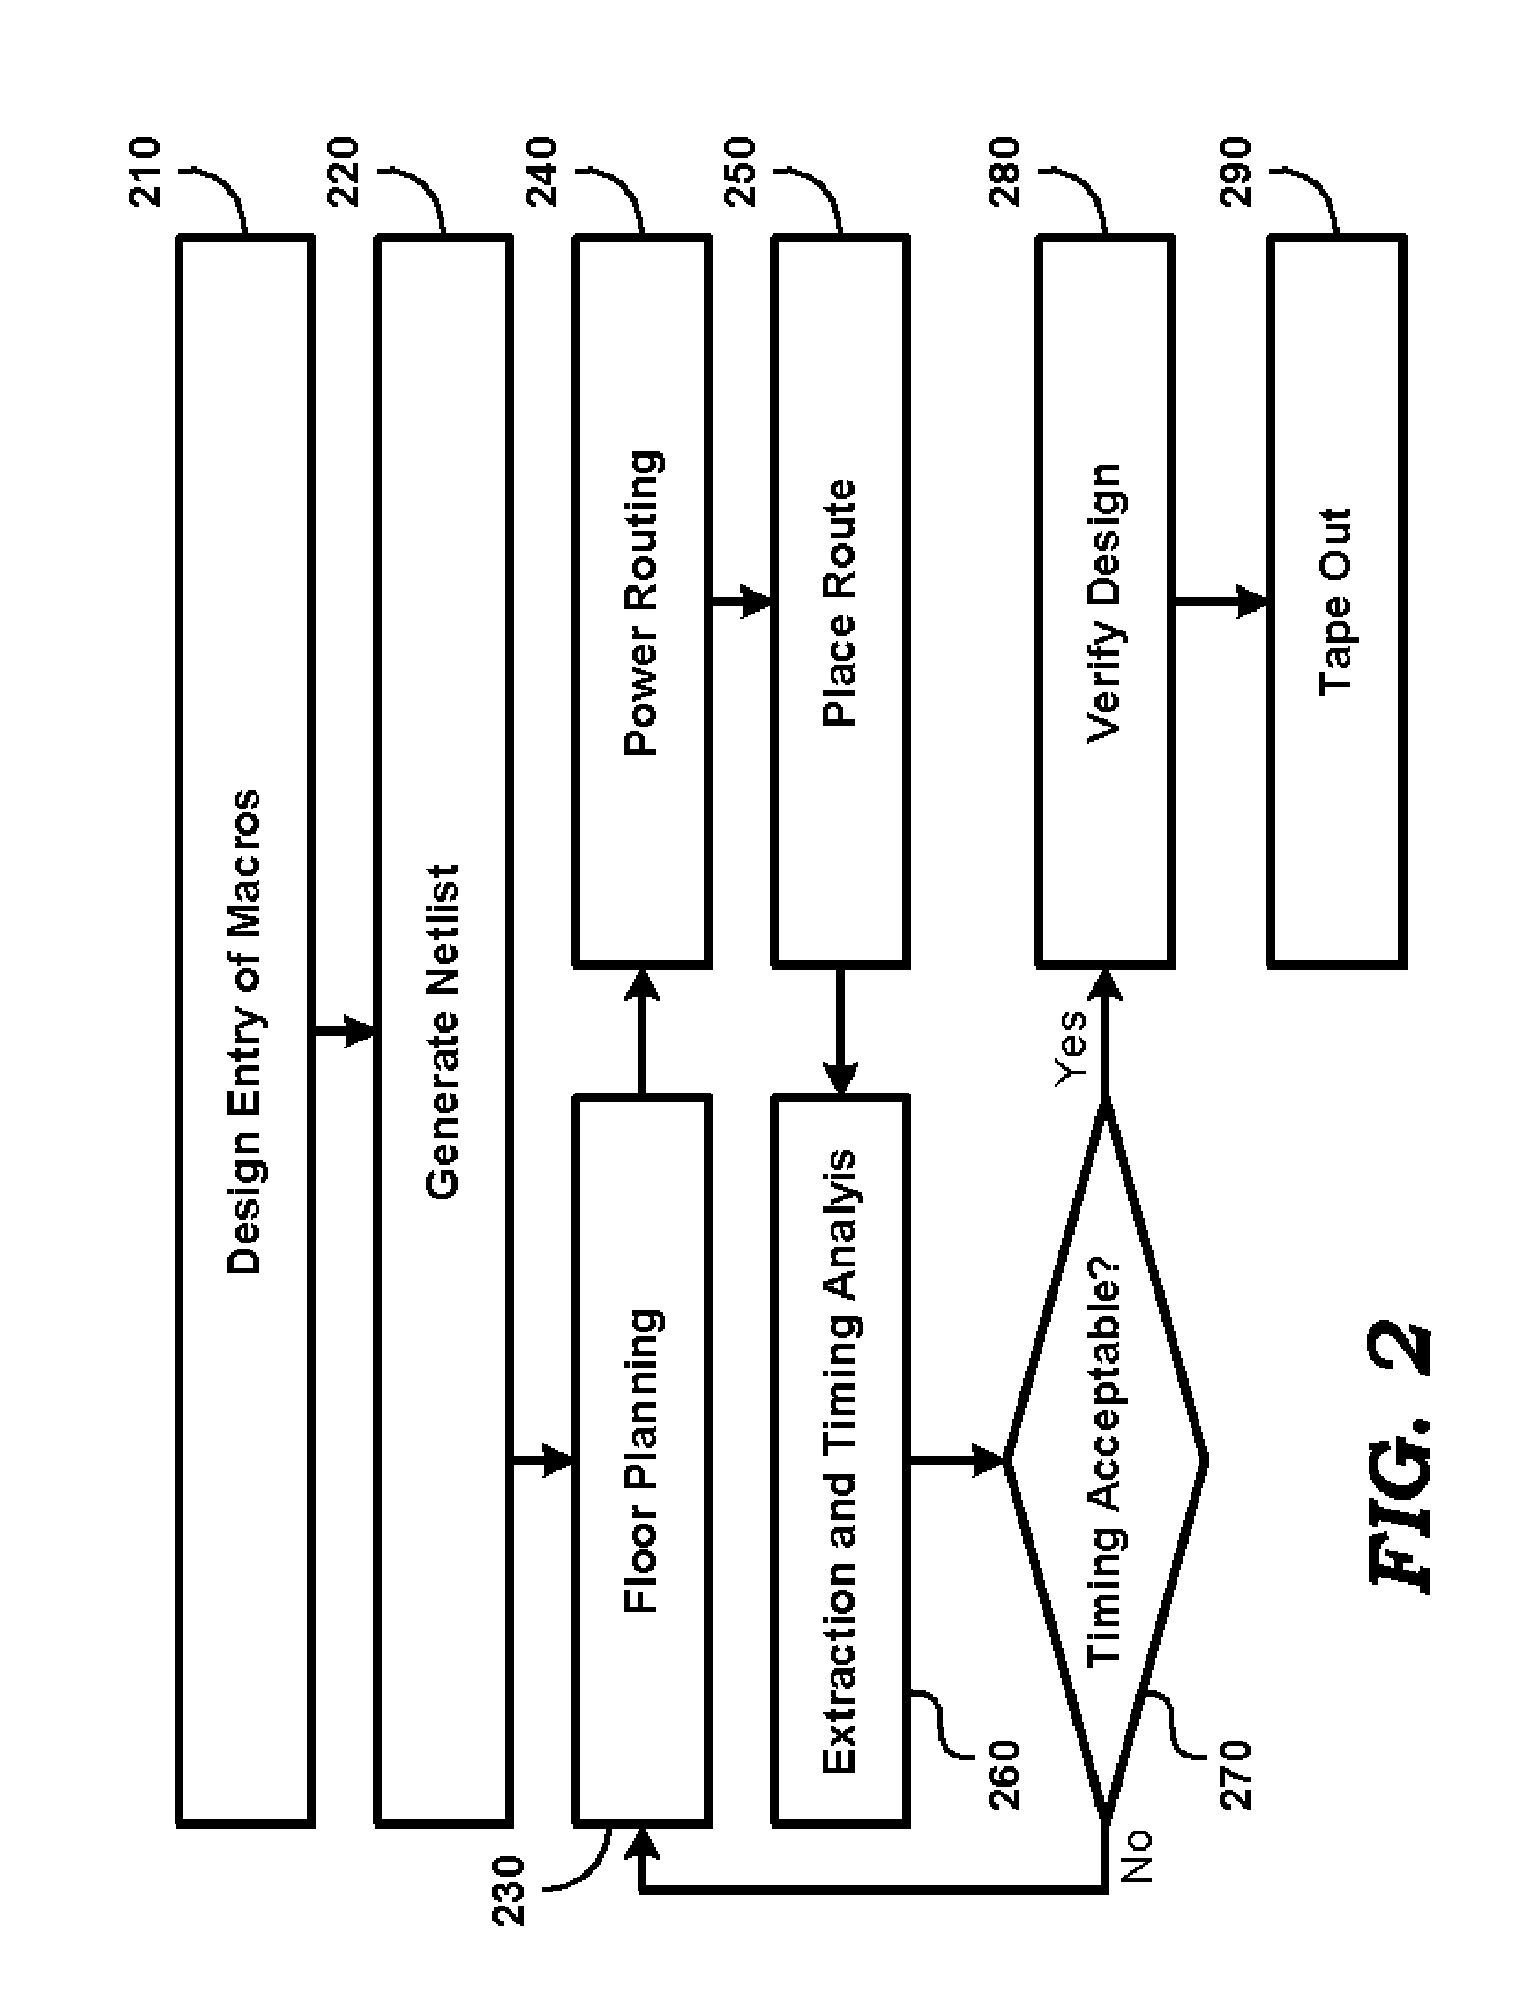 Automating optimal placement of macro-blocks in the design of an integrated circuit